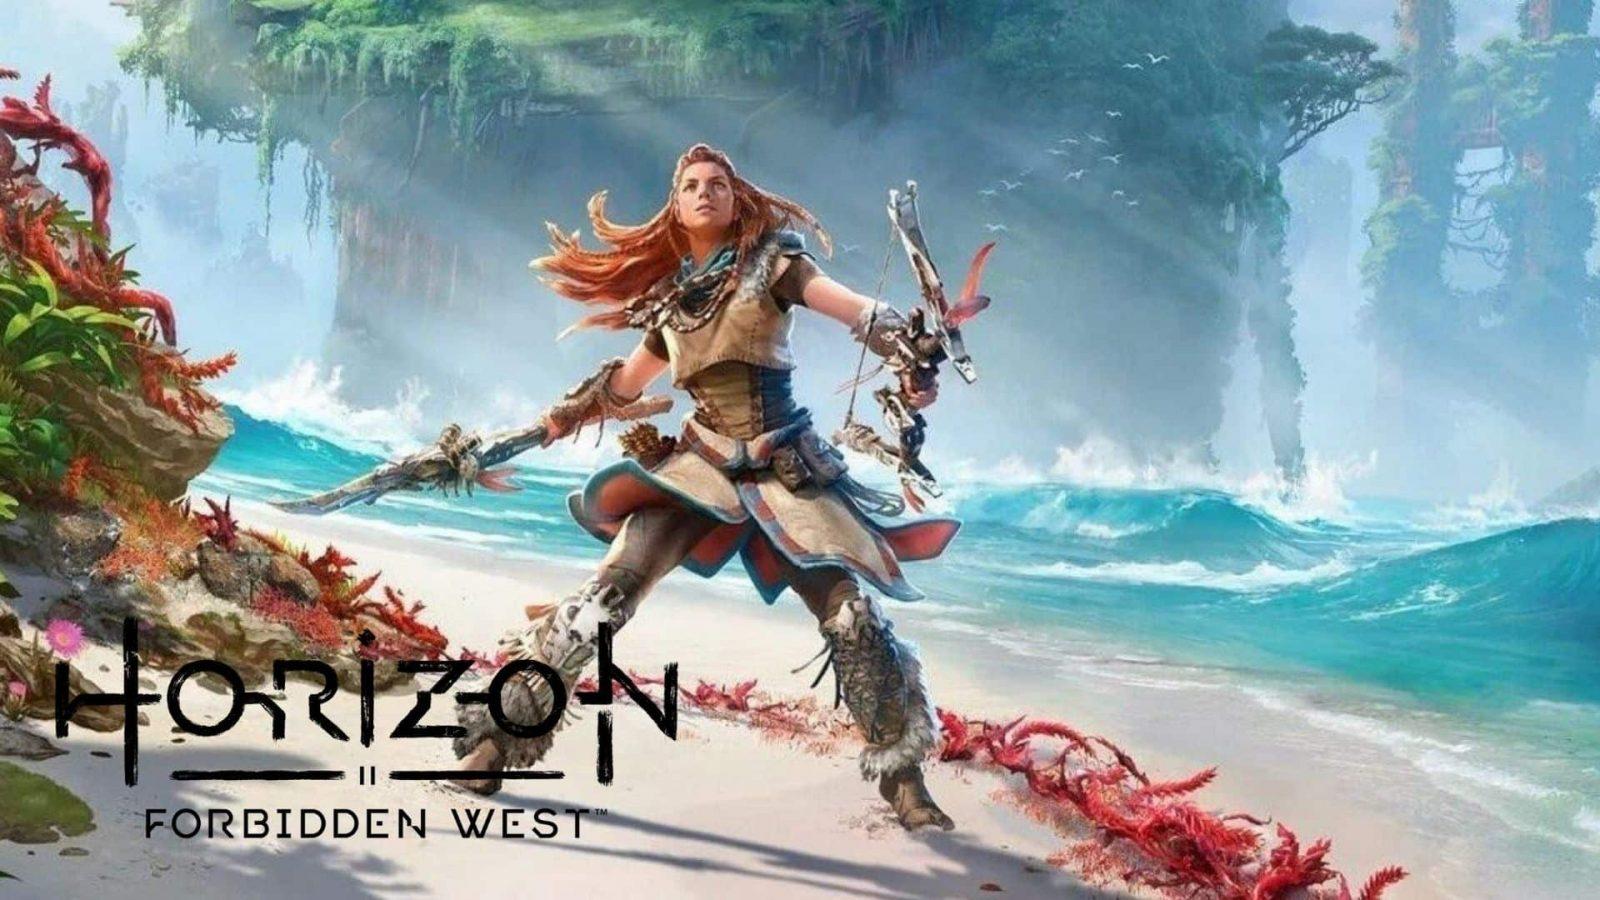 The first Horizon Forbidden West PS4 gameplay footage has been released